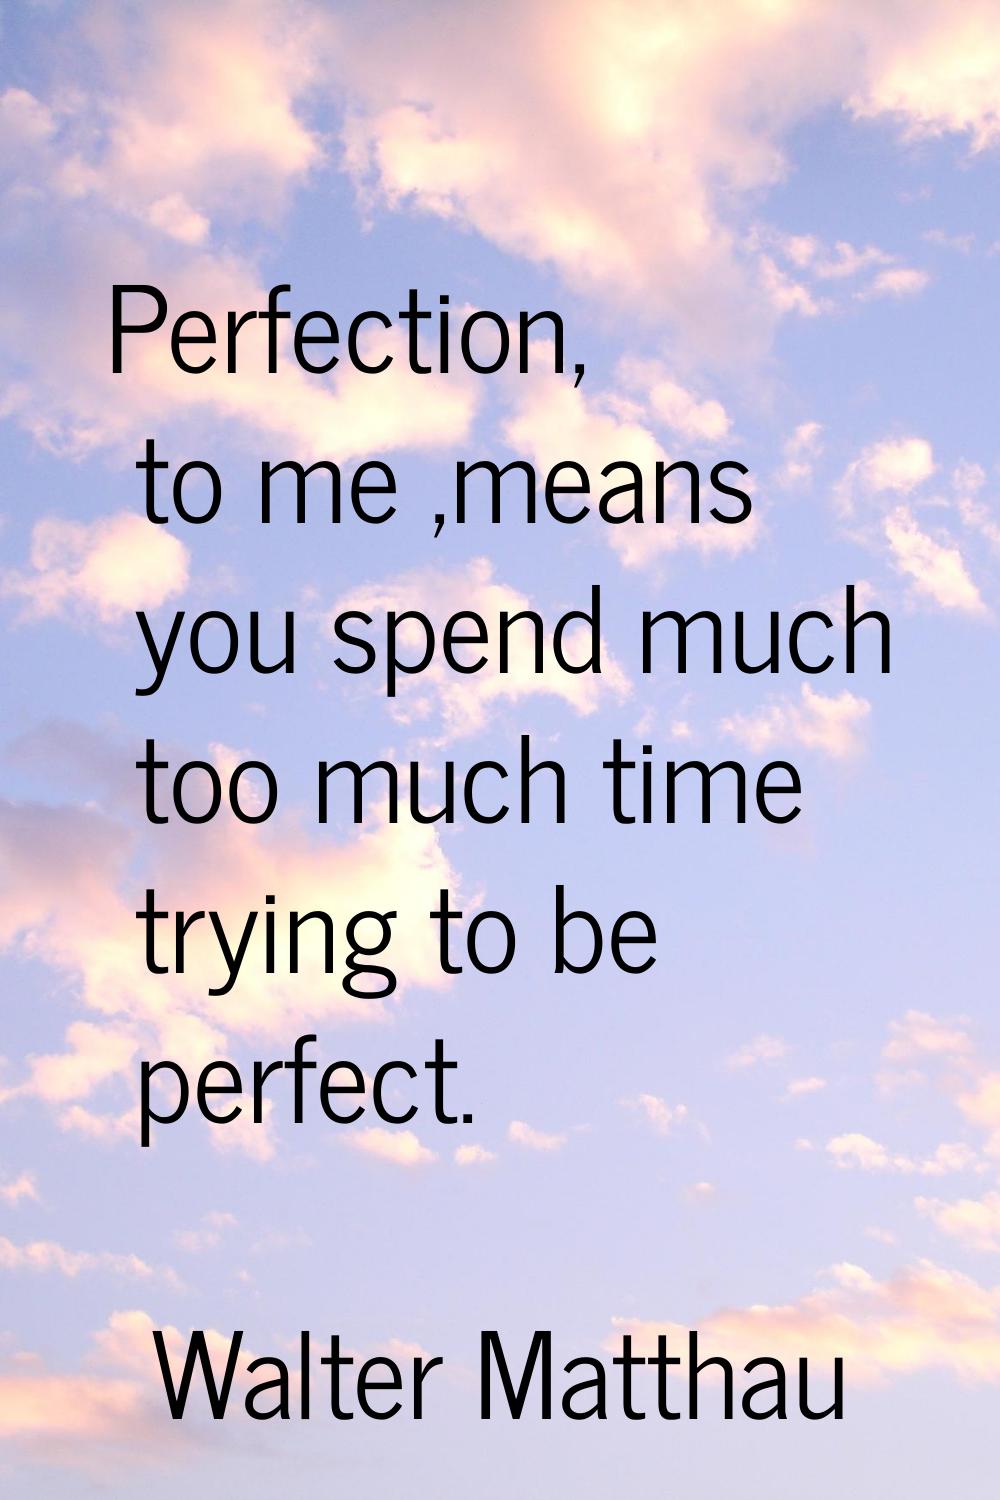 Perfection, to me ,means you spend much too much time trying to be perfect.